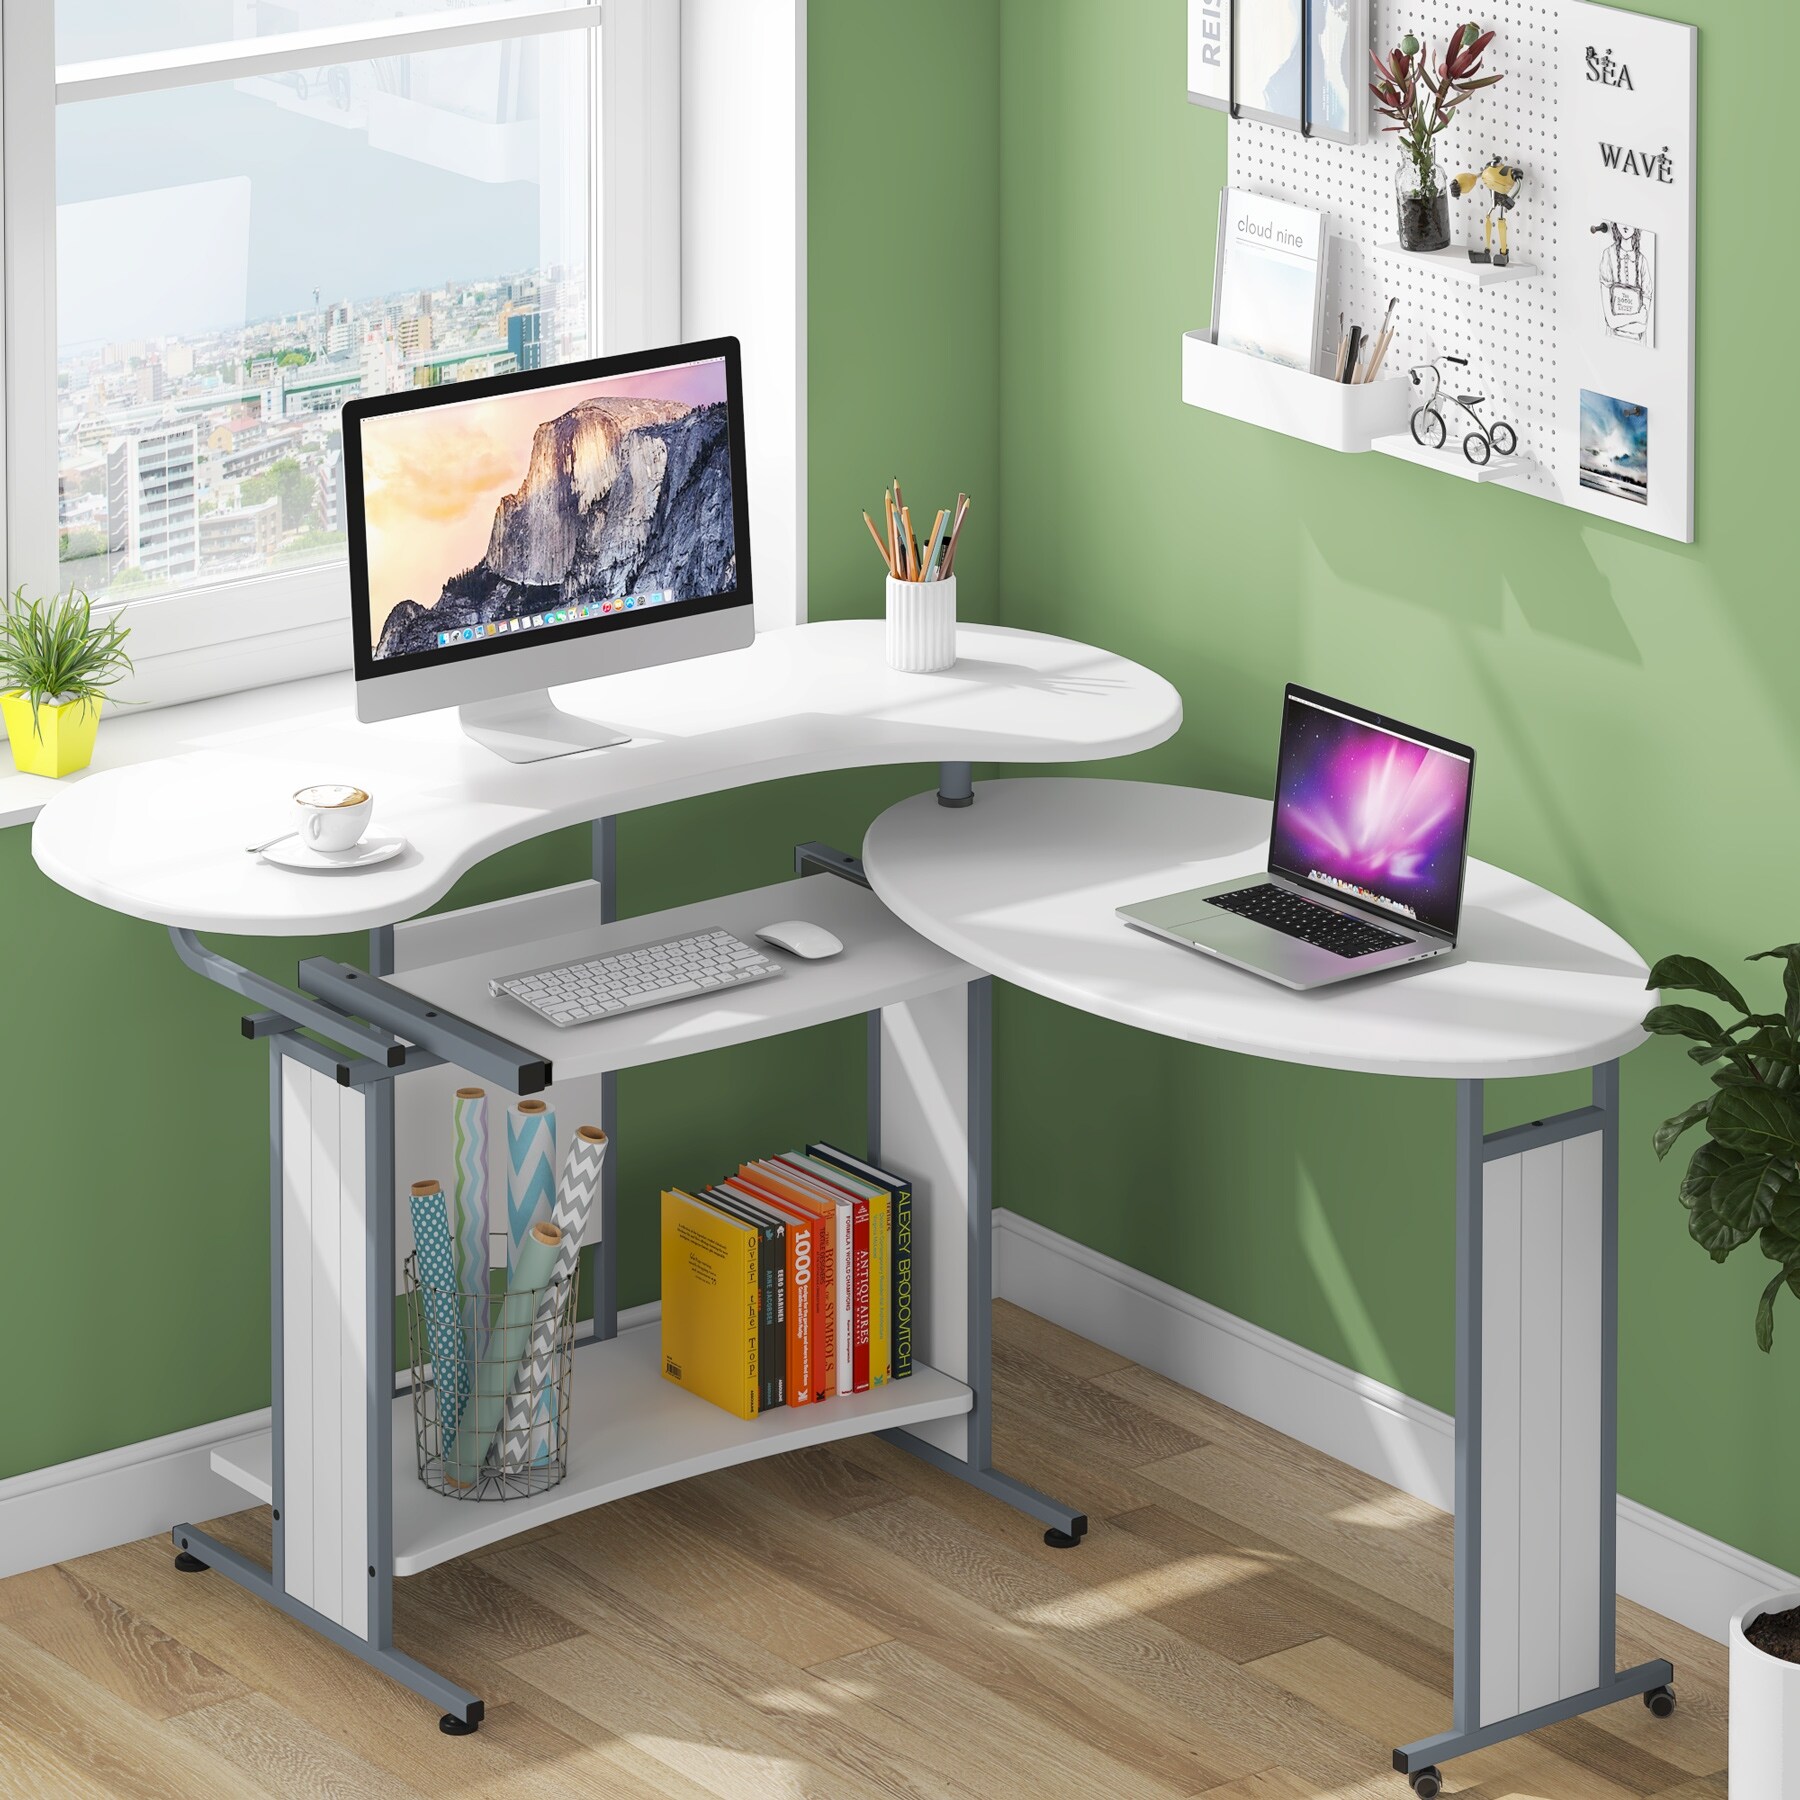 https://ak1.ostkcdn.com/images/products/is/images/direct/7439891a84f043a6e67a173c75ceaafebcfee3eb/Reversible-L-Shaped-Computer-Desk%2C-Modern-Rotating-Computer-Office-Corner-Desk-Studying-Writing-Table.jpg